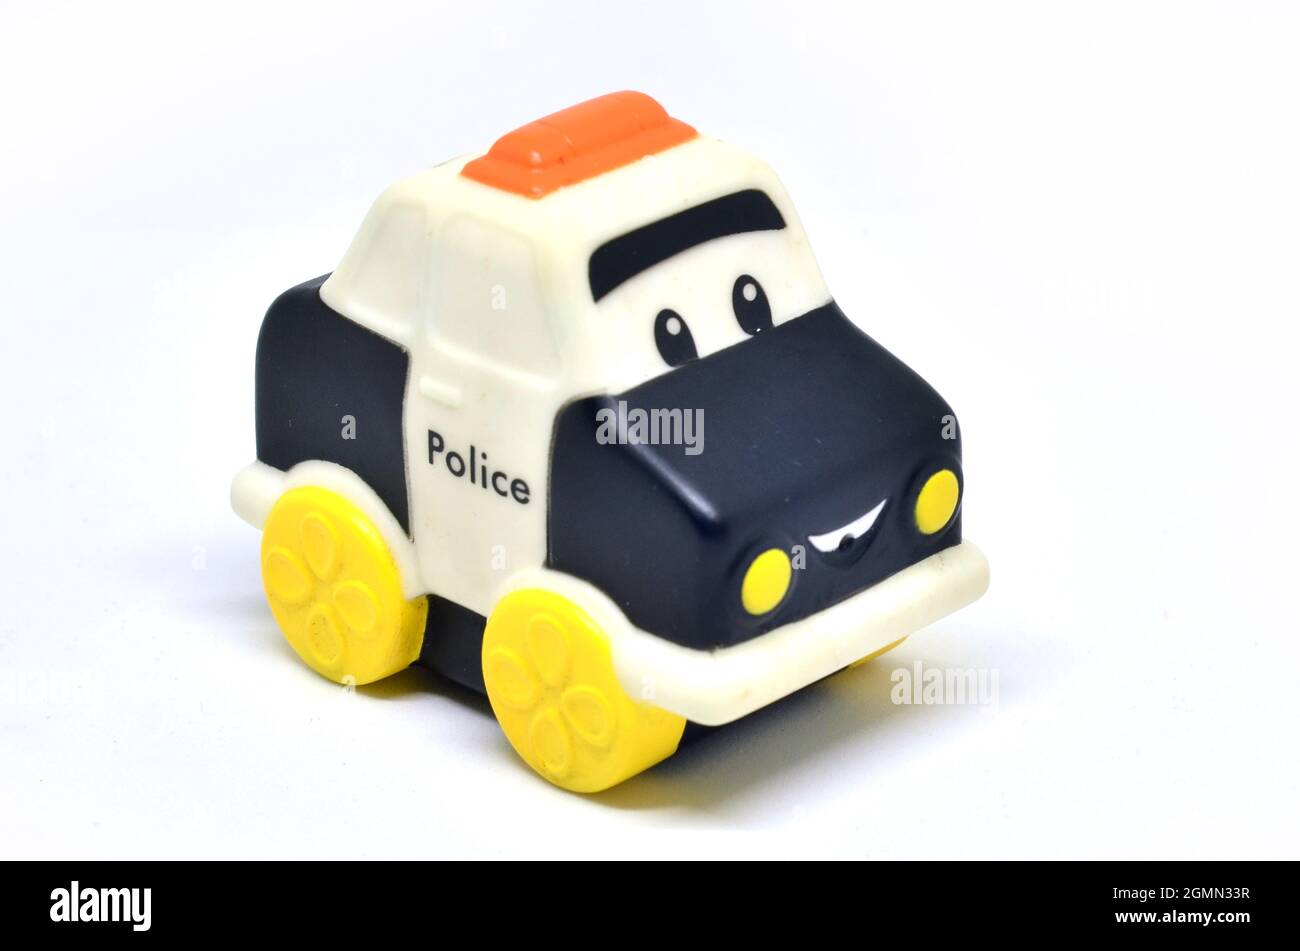 Rubber police toy car on a white background Stock Photo